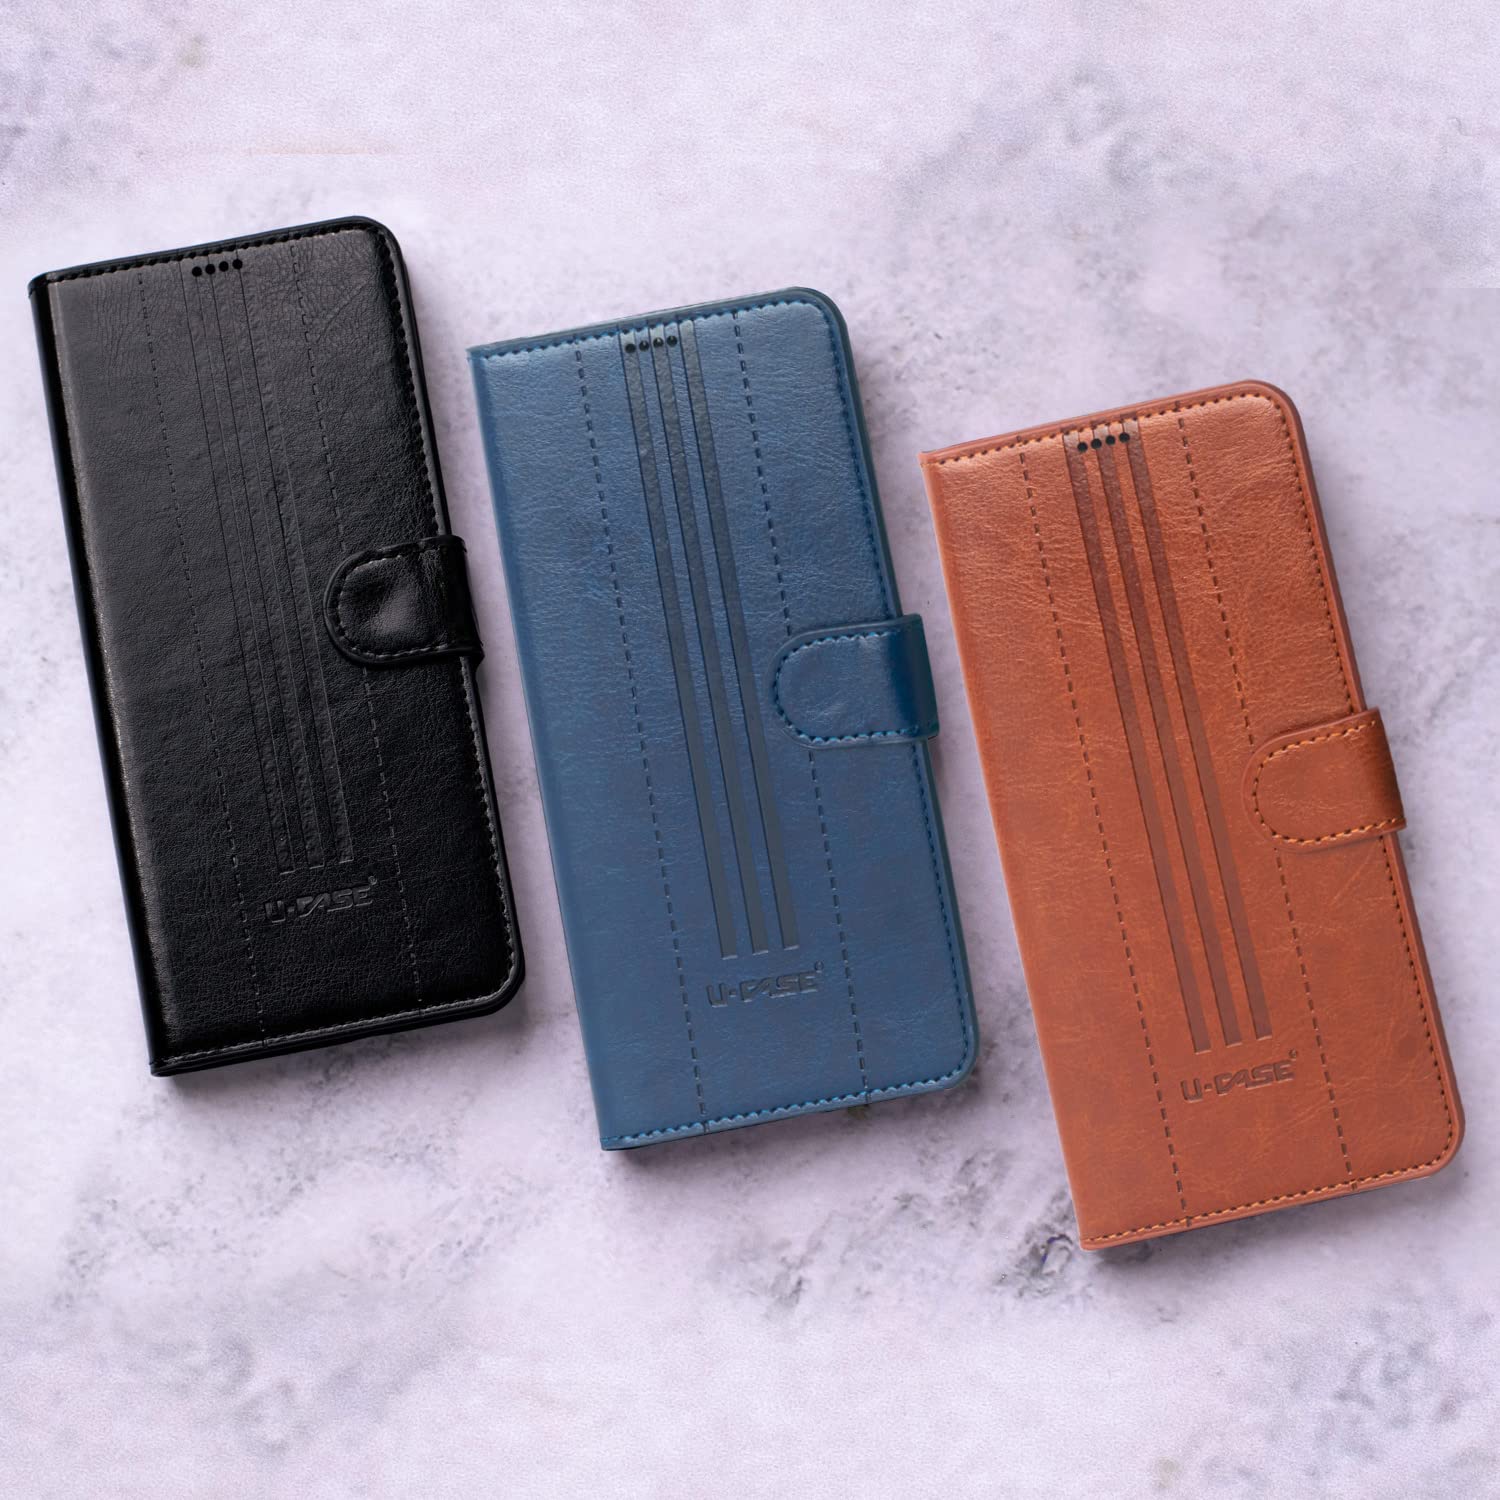 Shop U-CASE Flip Cover for Oppo A31 Vegan Foldable Stand & Pocket Magnetic Closure colors